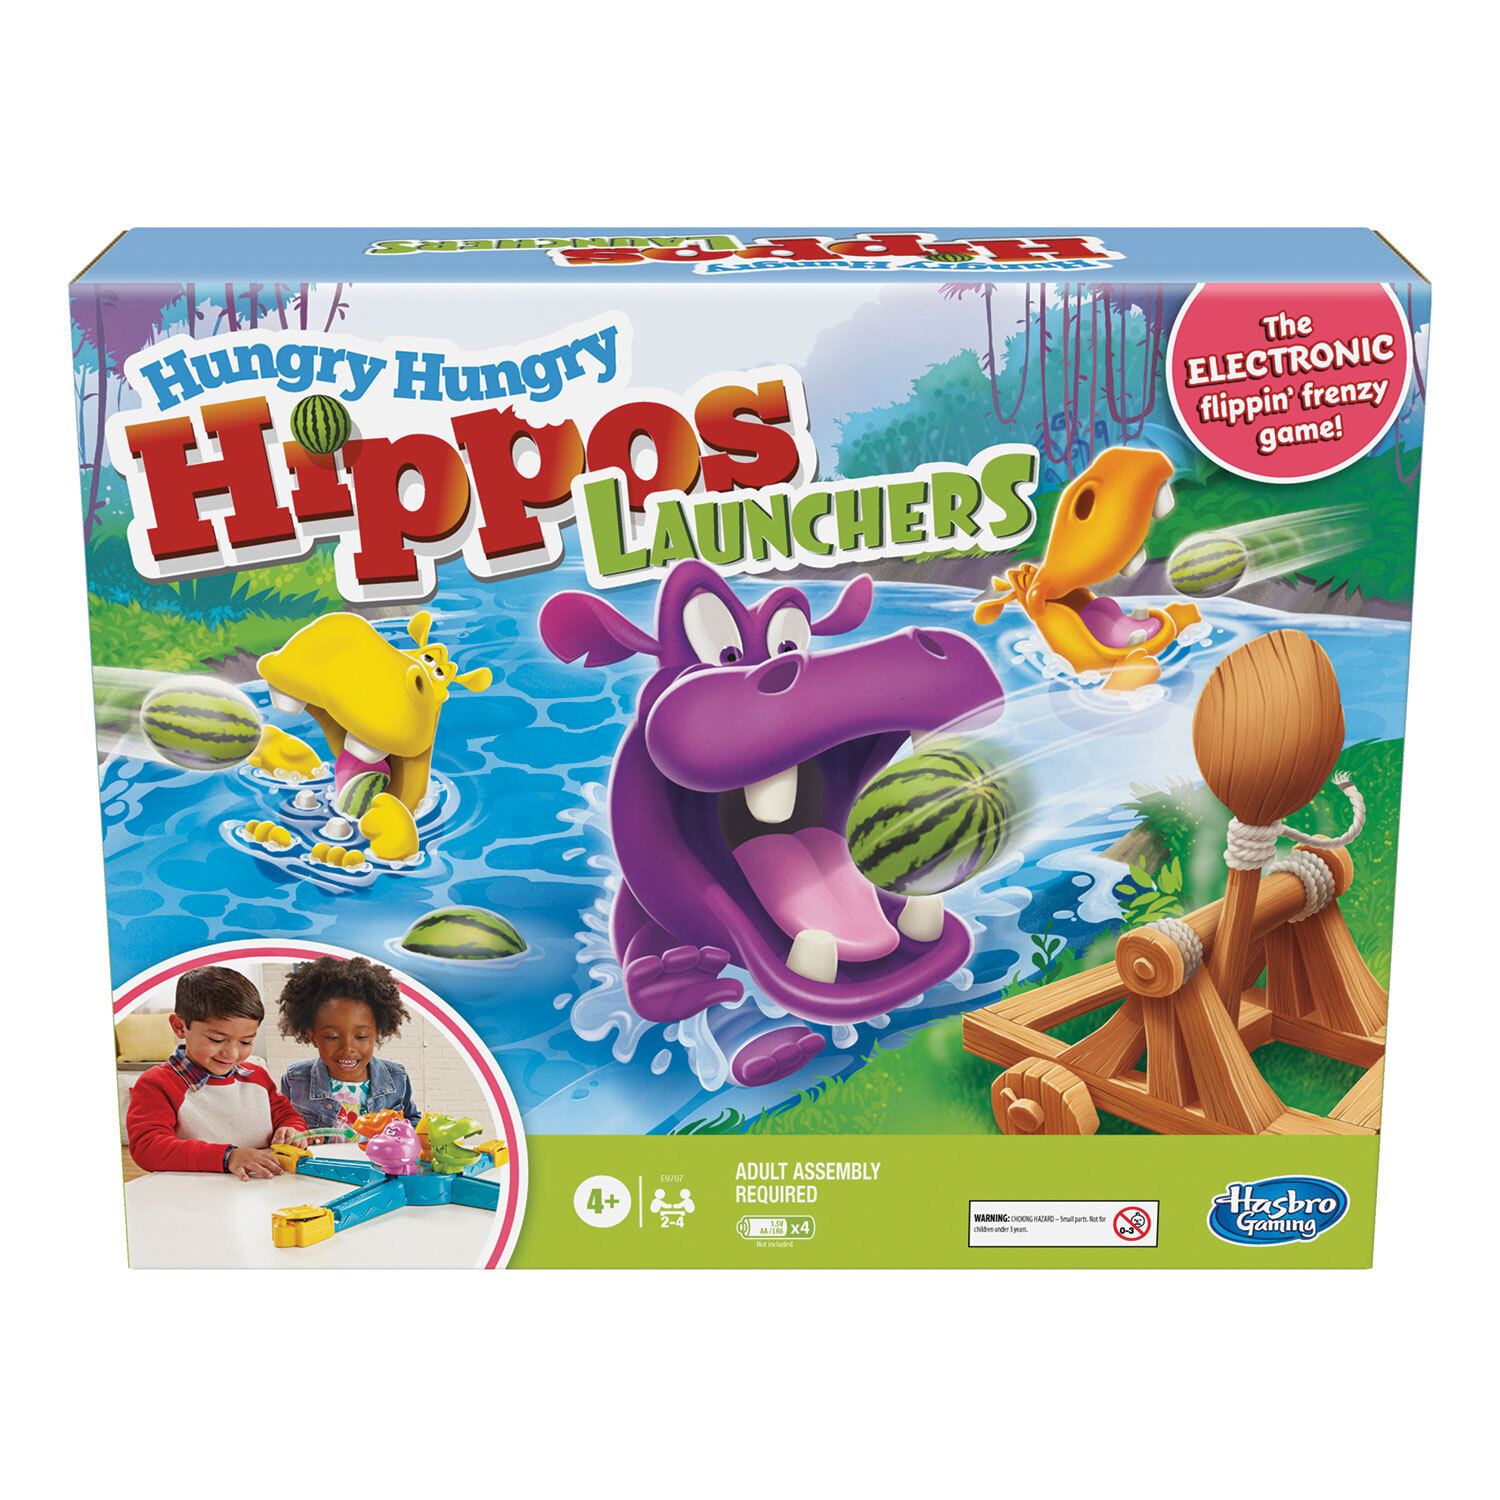 Hasbro Hungry Hungry Hippos Launchers Game Image 1